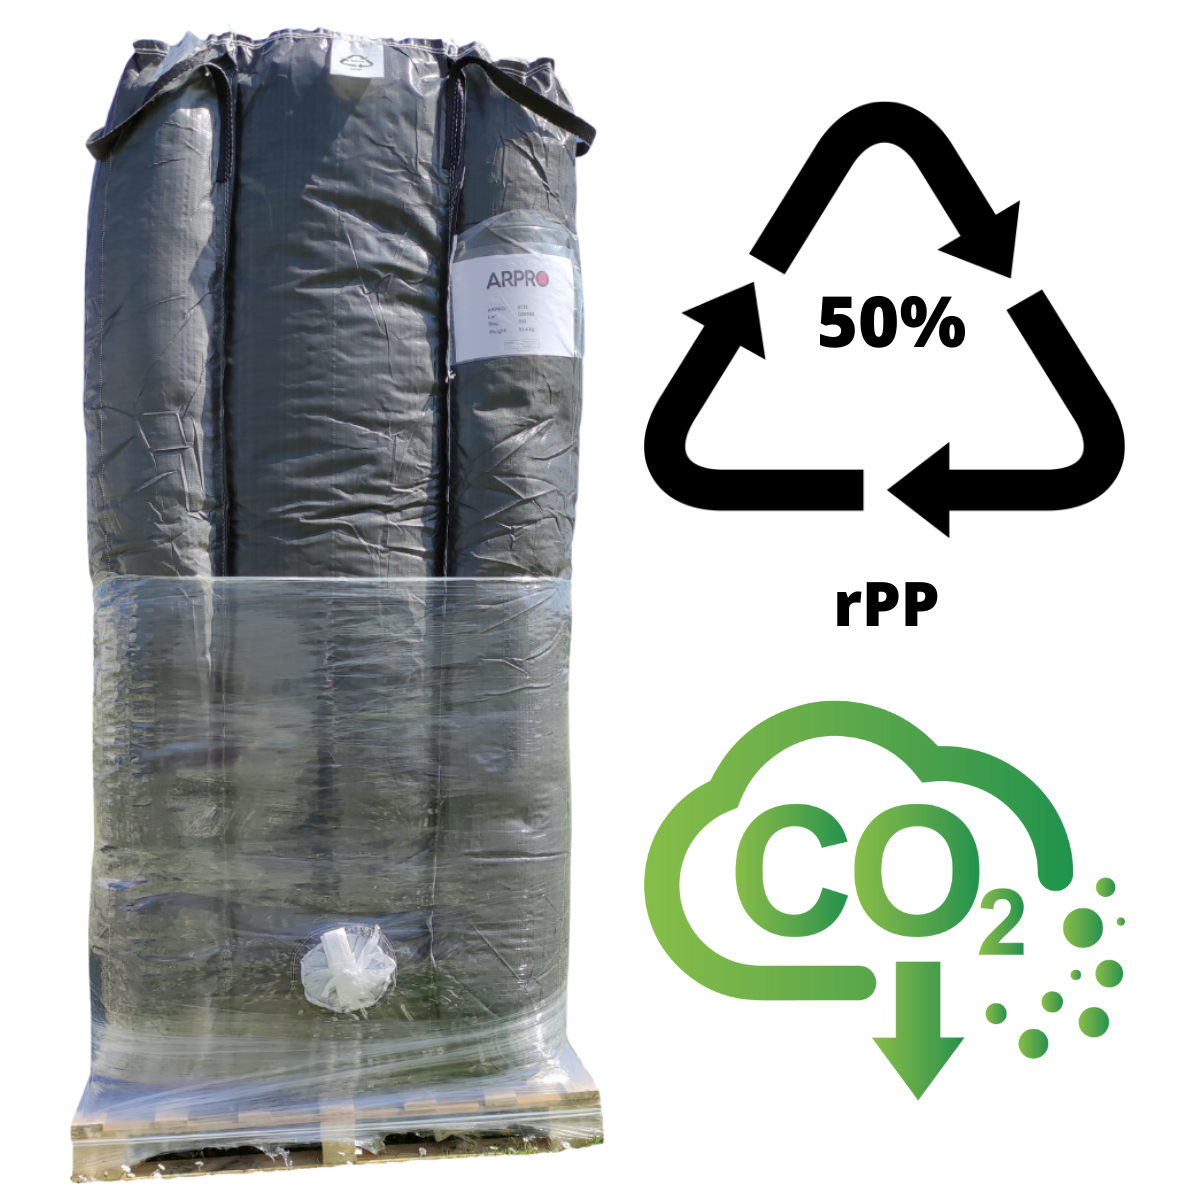 New RE bags made with 50% recycled PP content